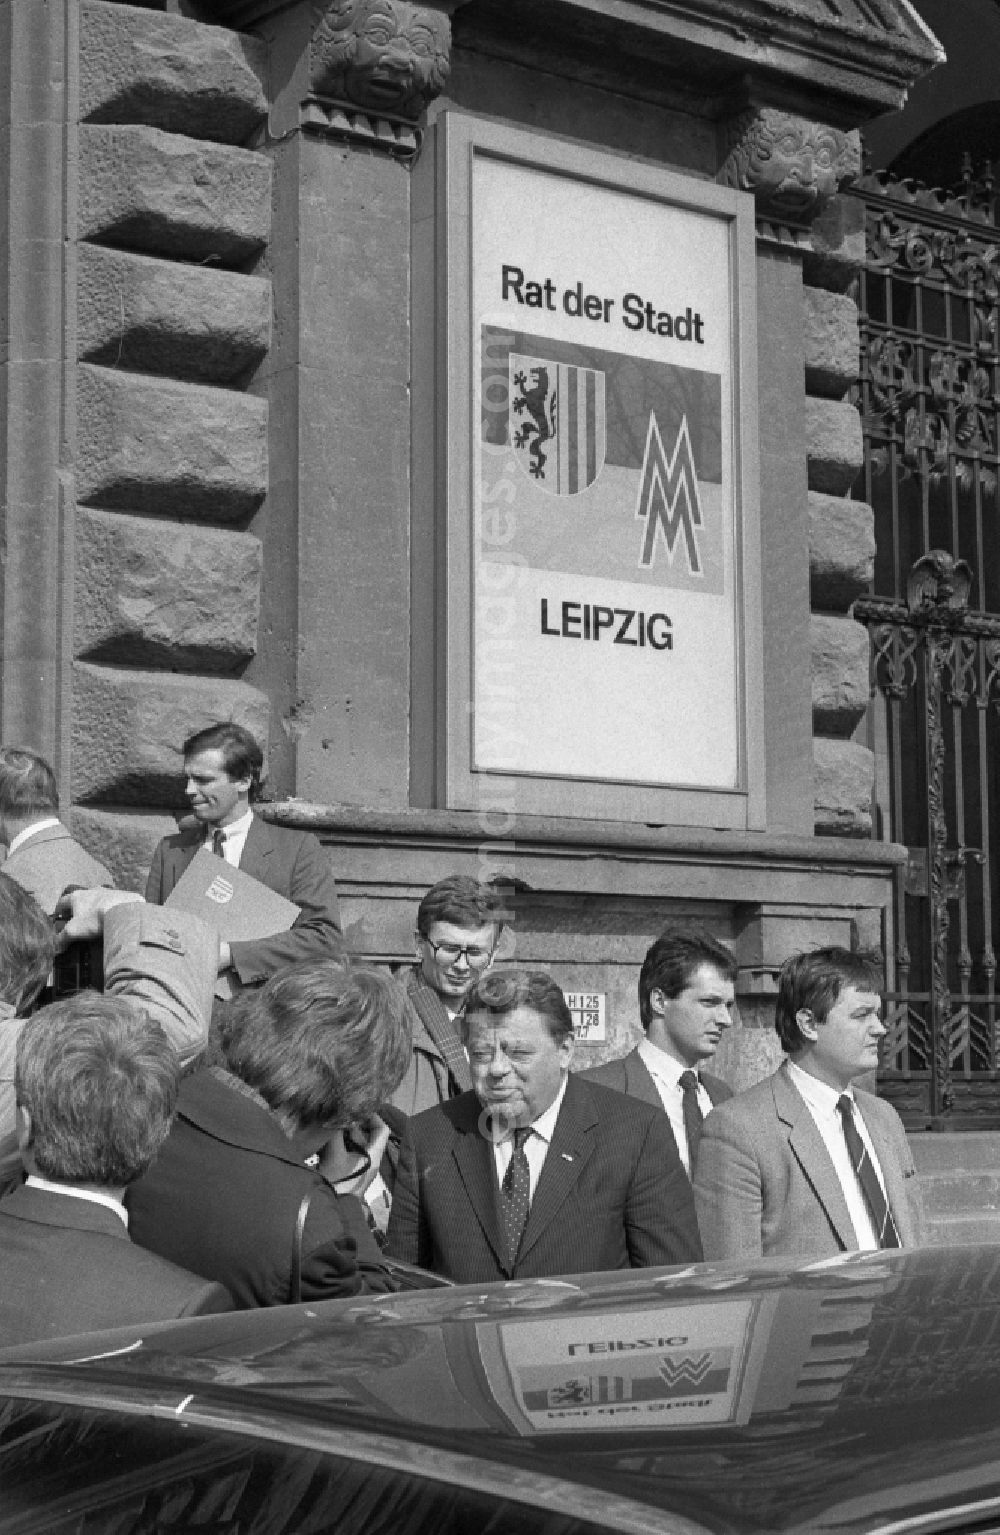 GDR image archive: Leipzig - Reception for politicians CSU chairman Franz Josef Strauss in front of the town hall in the district of Mitte in Leipzig in the state of Saxony in the area of the former GDR, German Democratic Republic